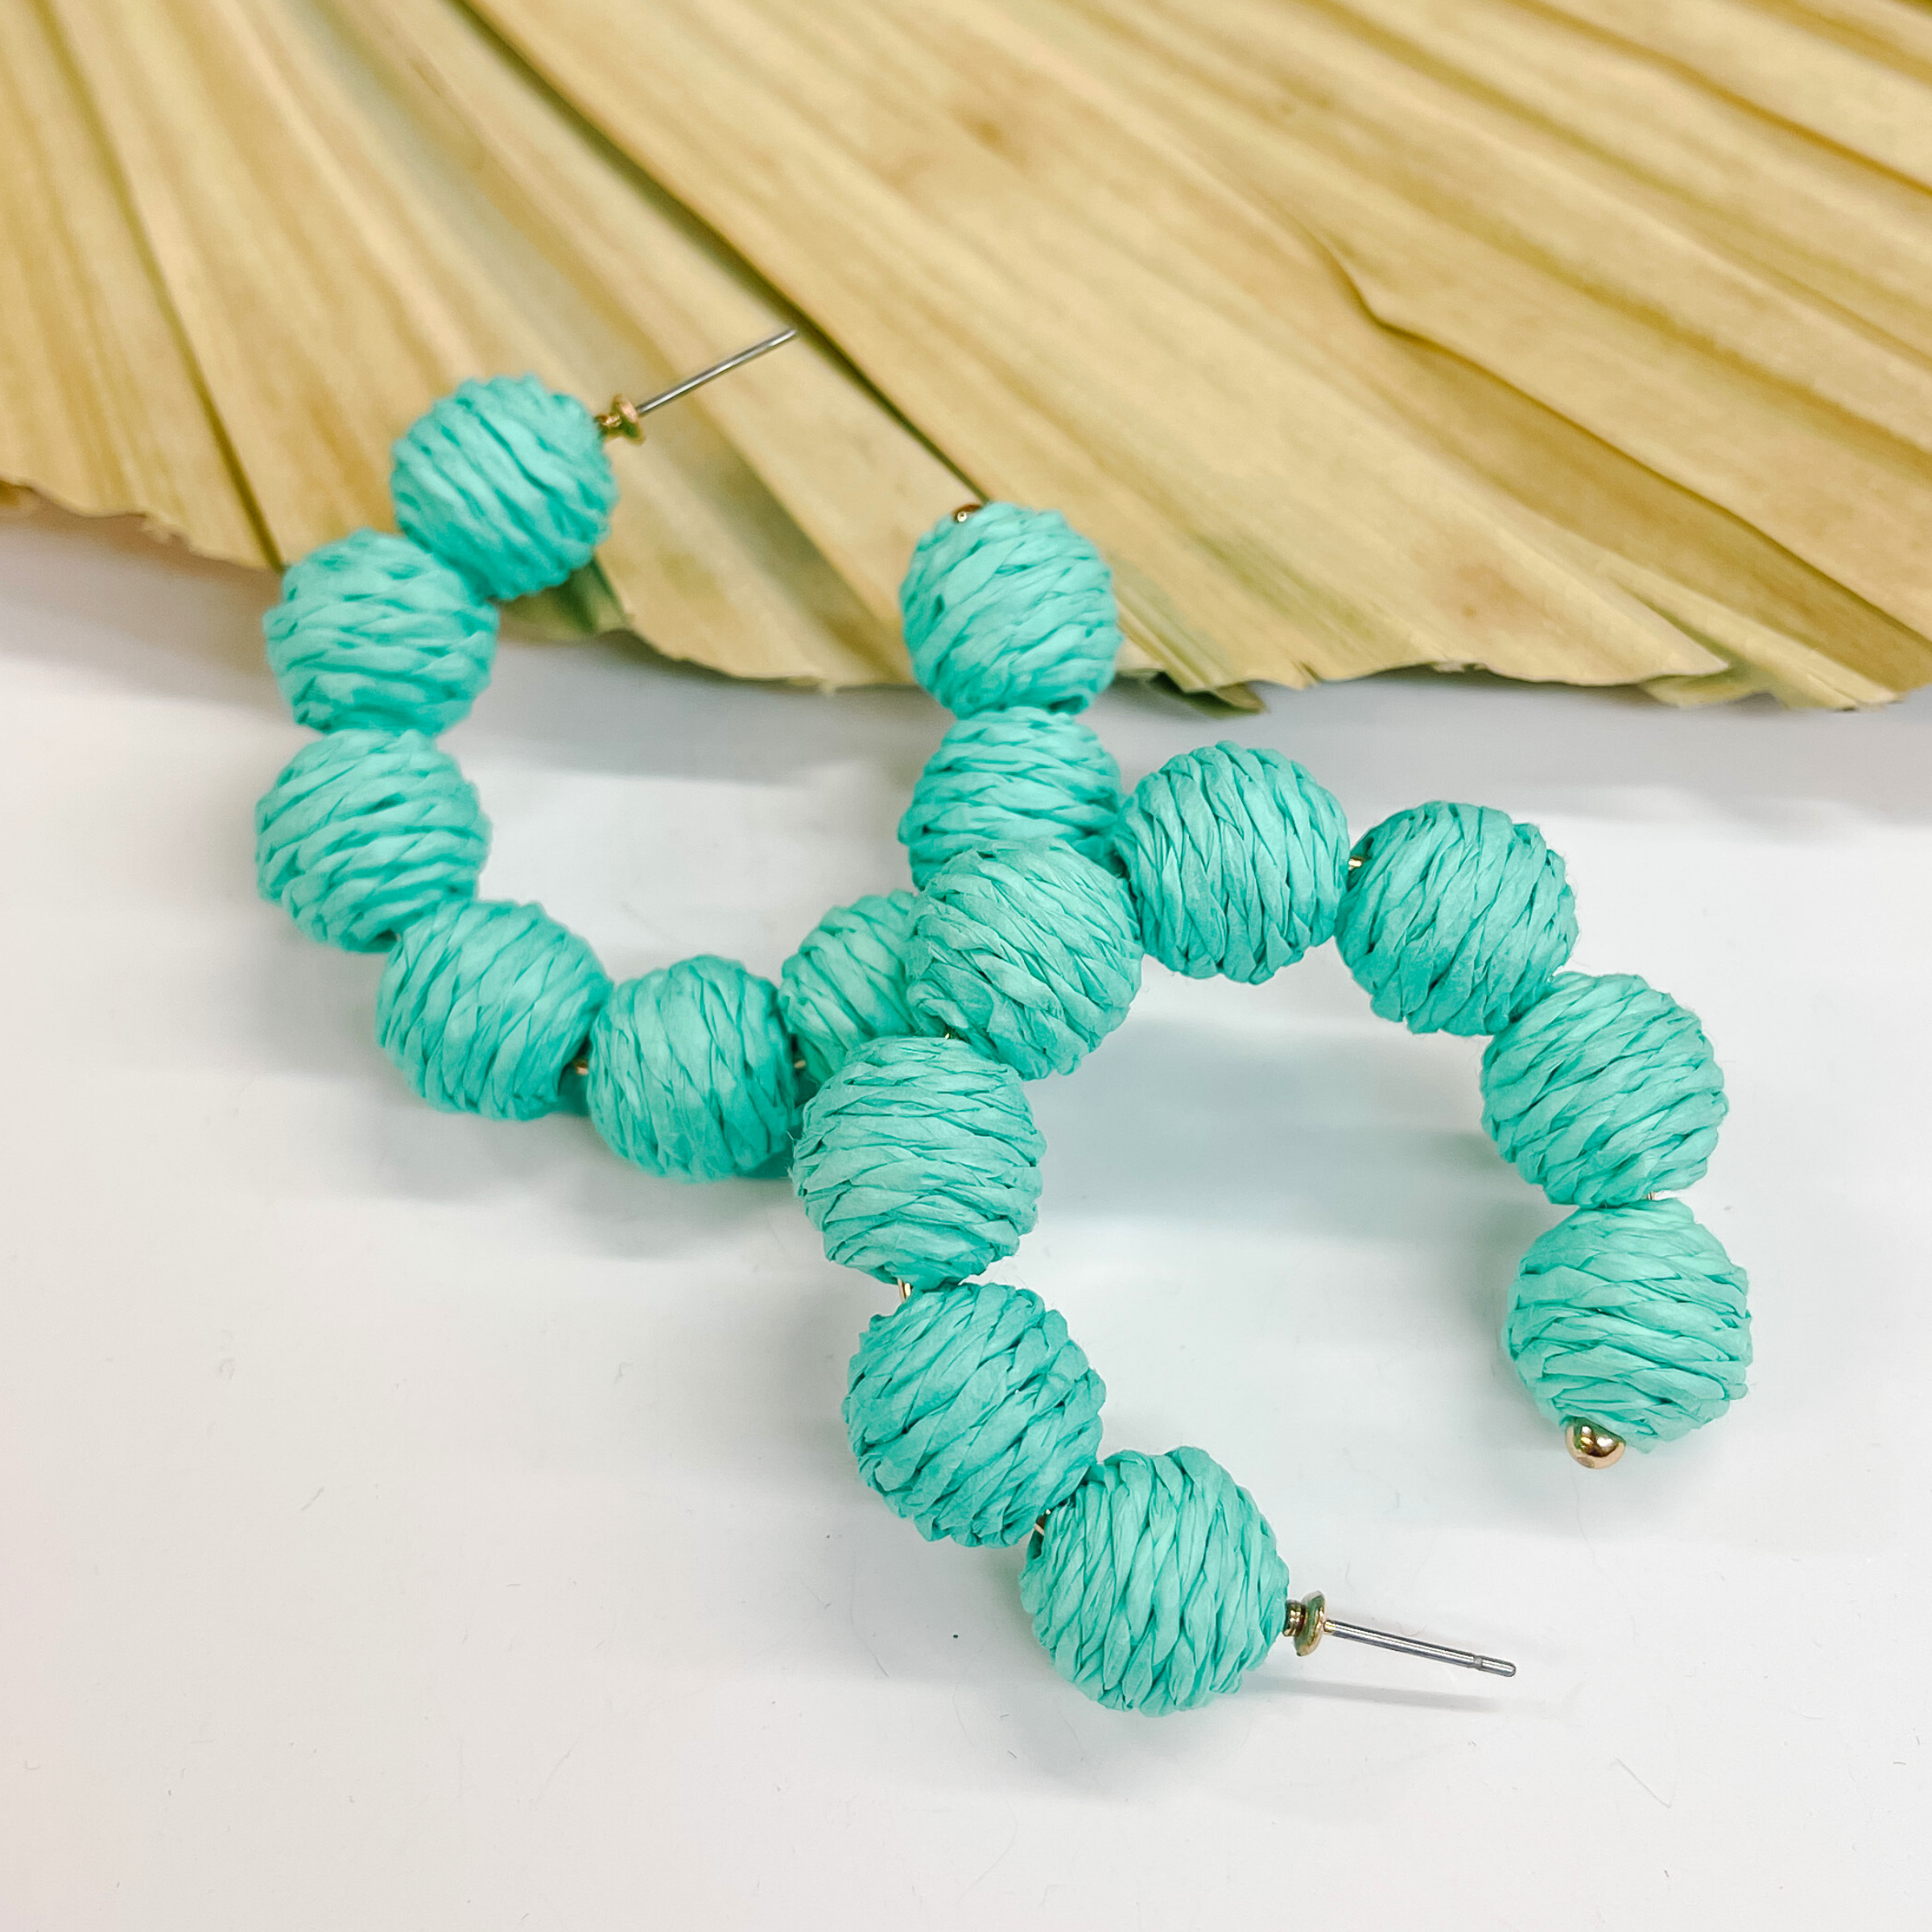 Hoop earrings with raffia balls around. The balls are wrapped in turquoise raffia. Taken on a white background and  leaned up against a dried up palm leaf.